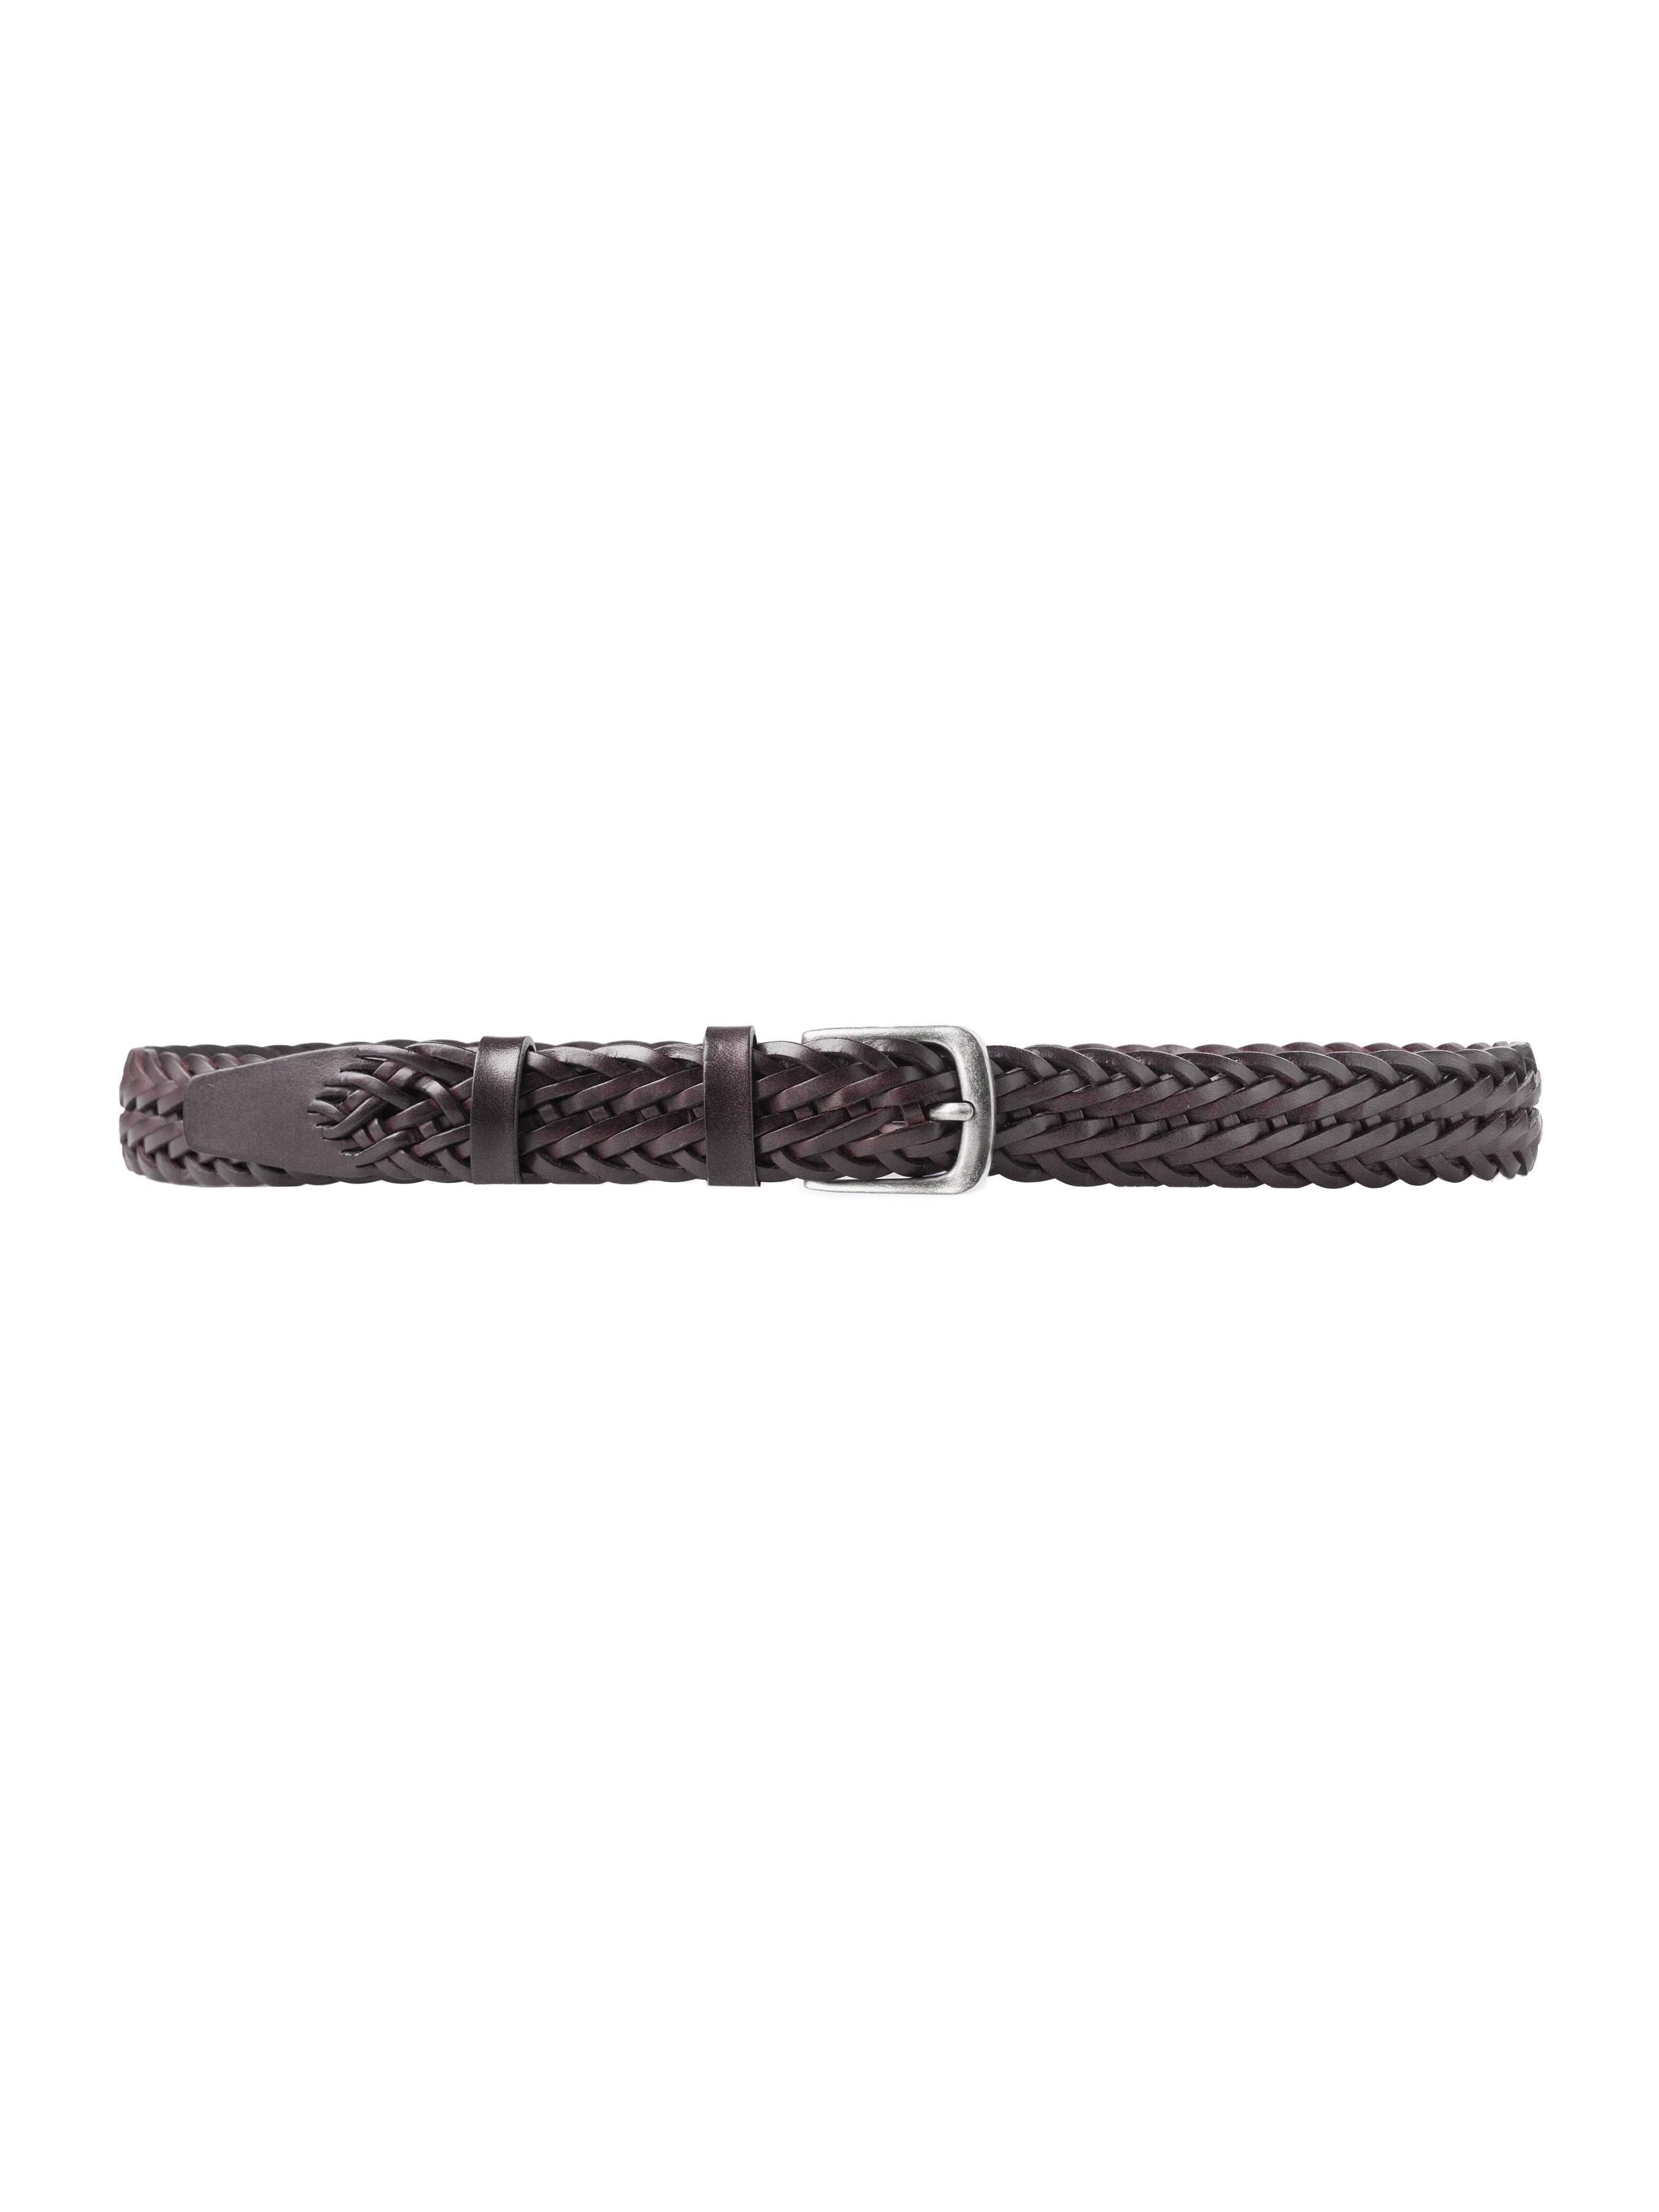 Weave Leather Belt with Palladium - Toned Buckle